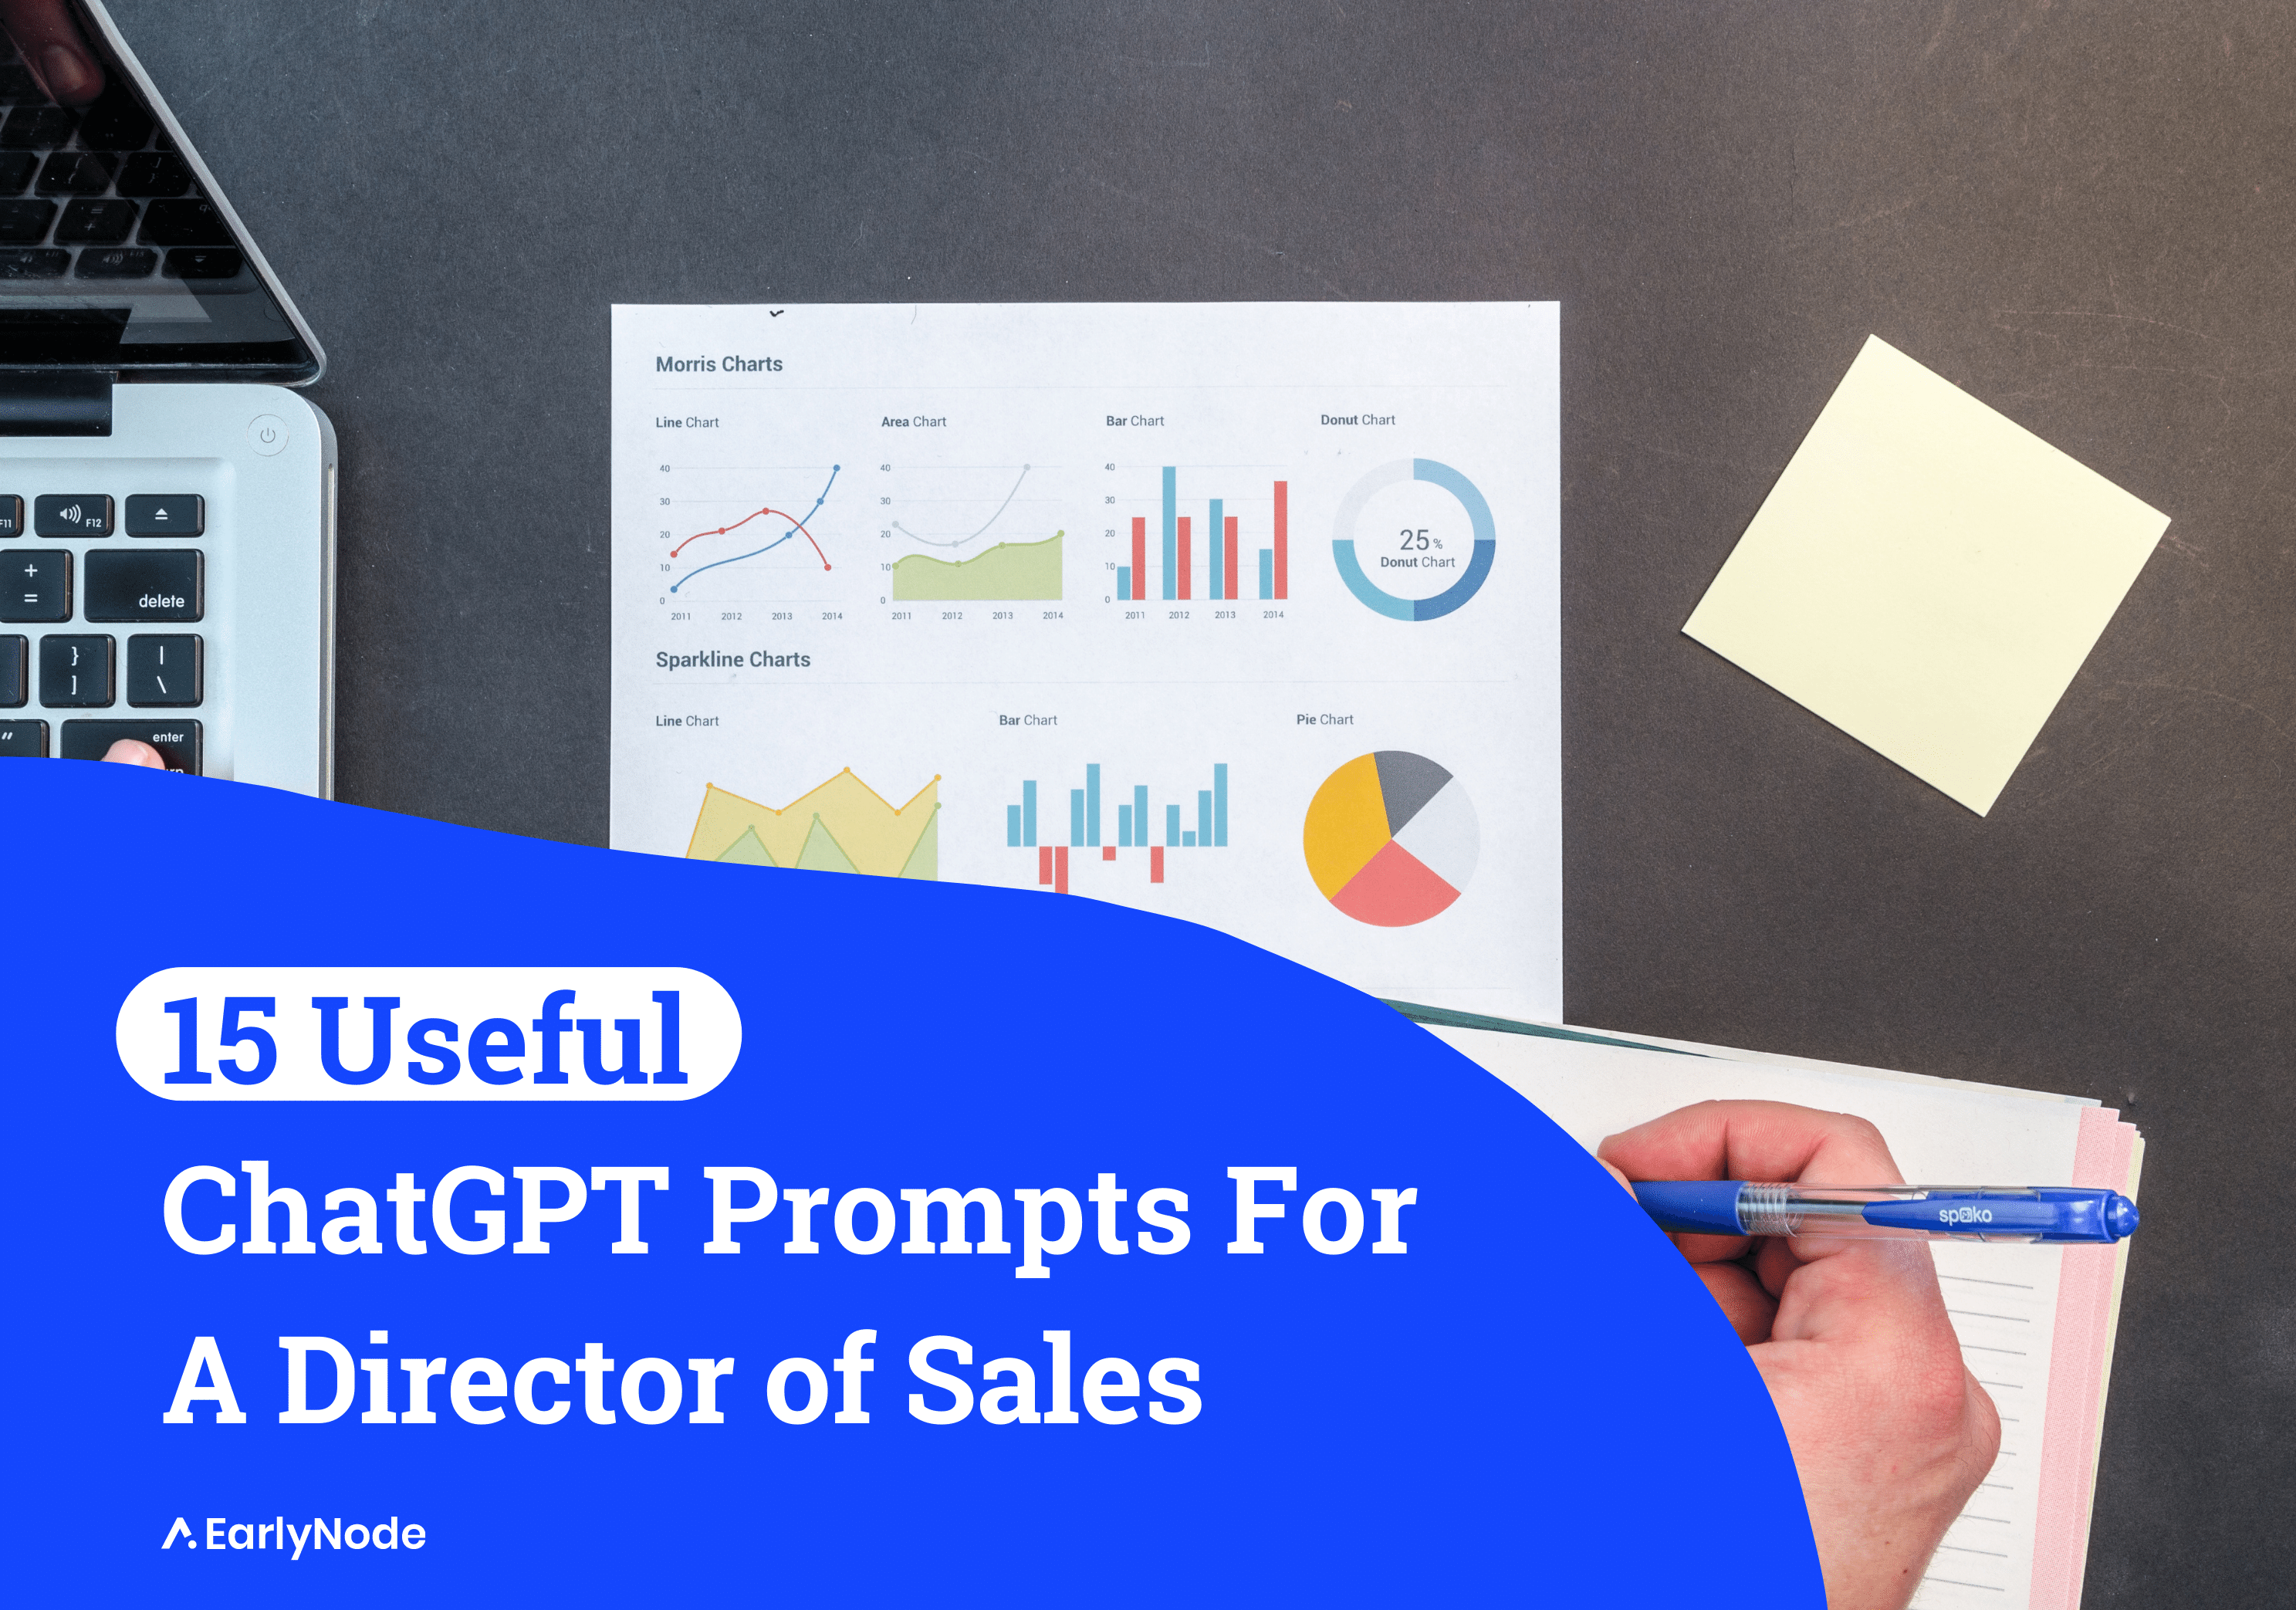 15 Effective ChatGPT Prompts For the Director of Sales